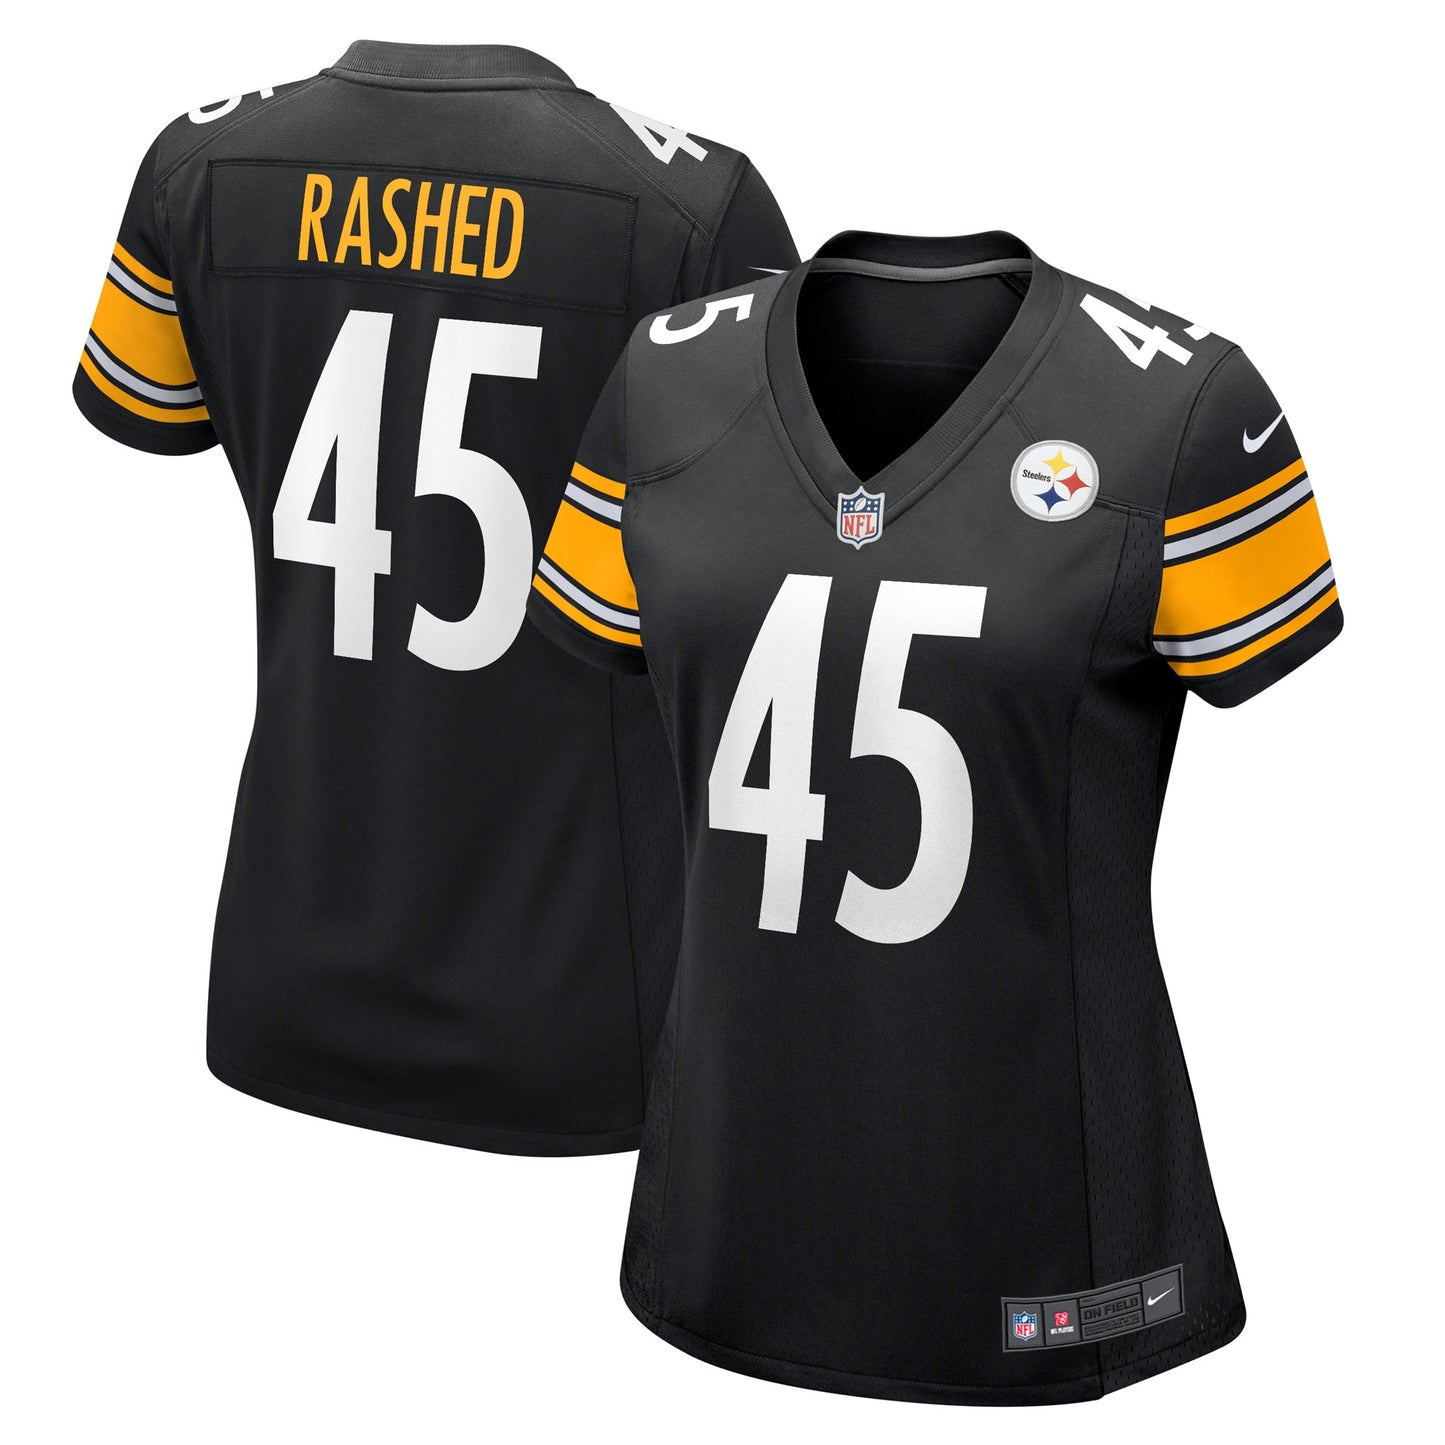 Hamilcar Rashed Jr. Pittsburgh Steelers Nike Women's Game Player Jersey - Black